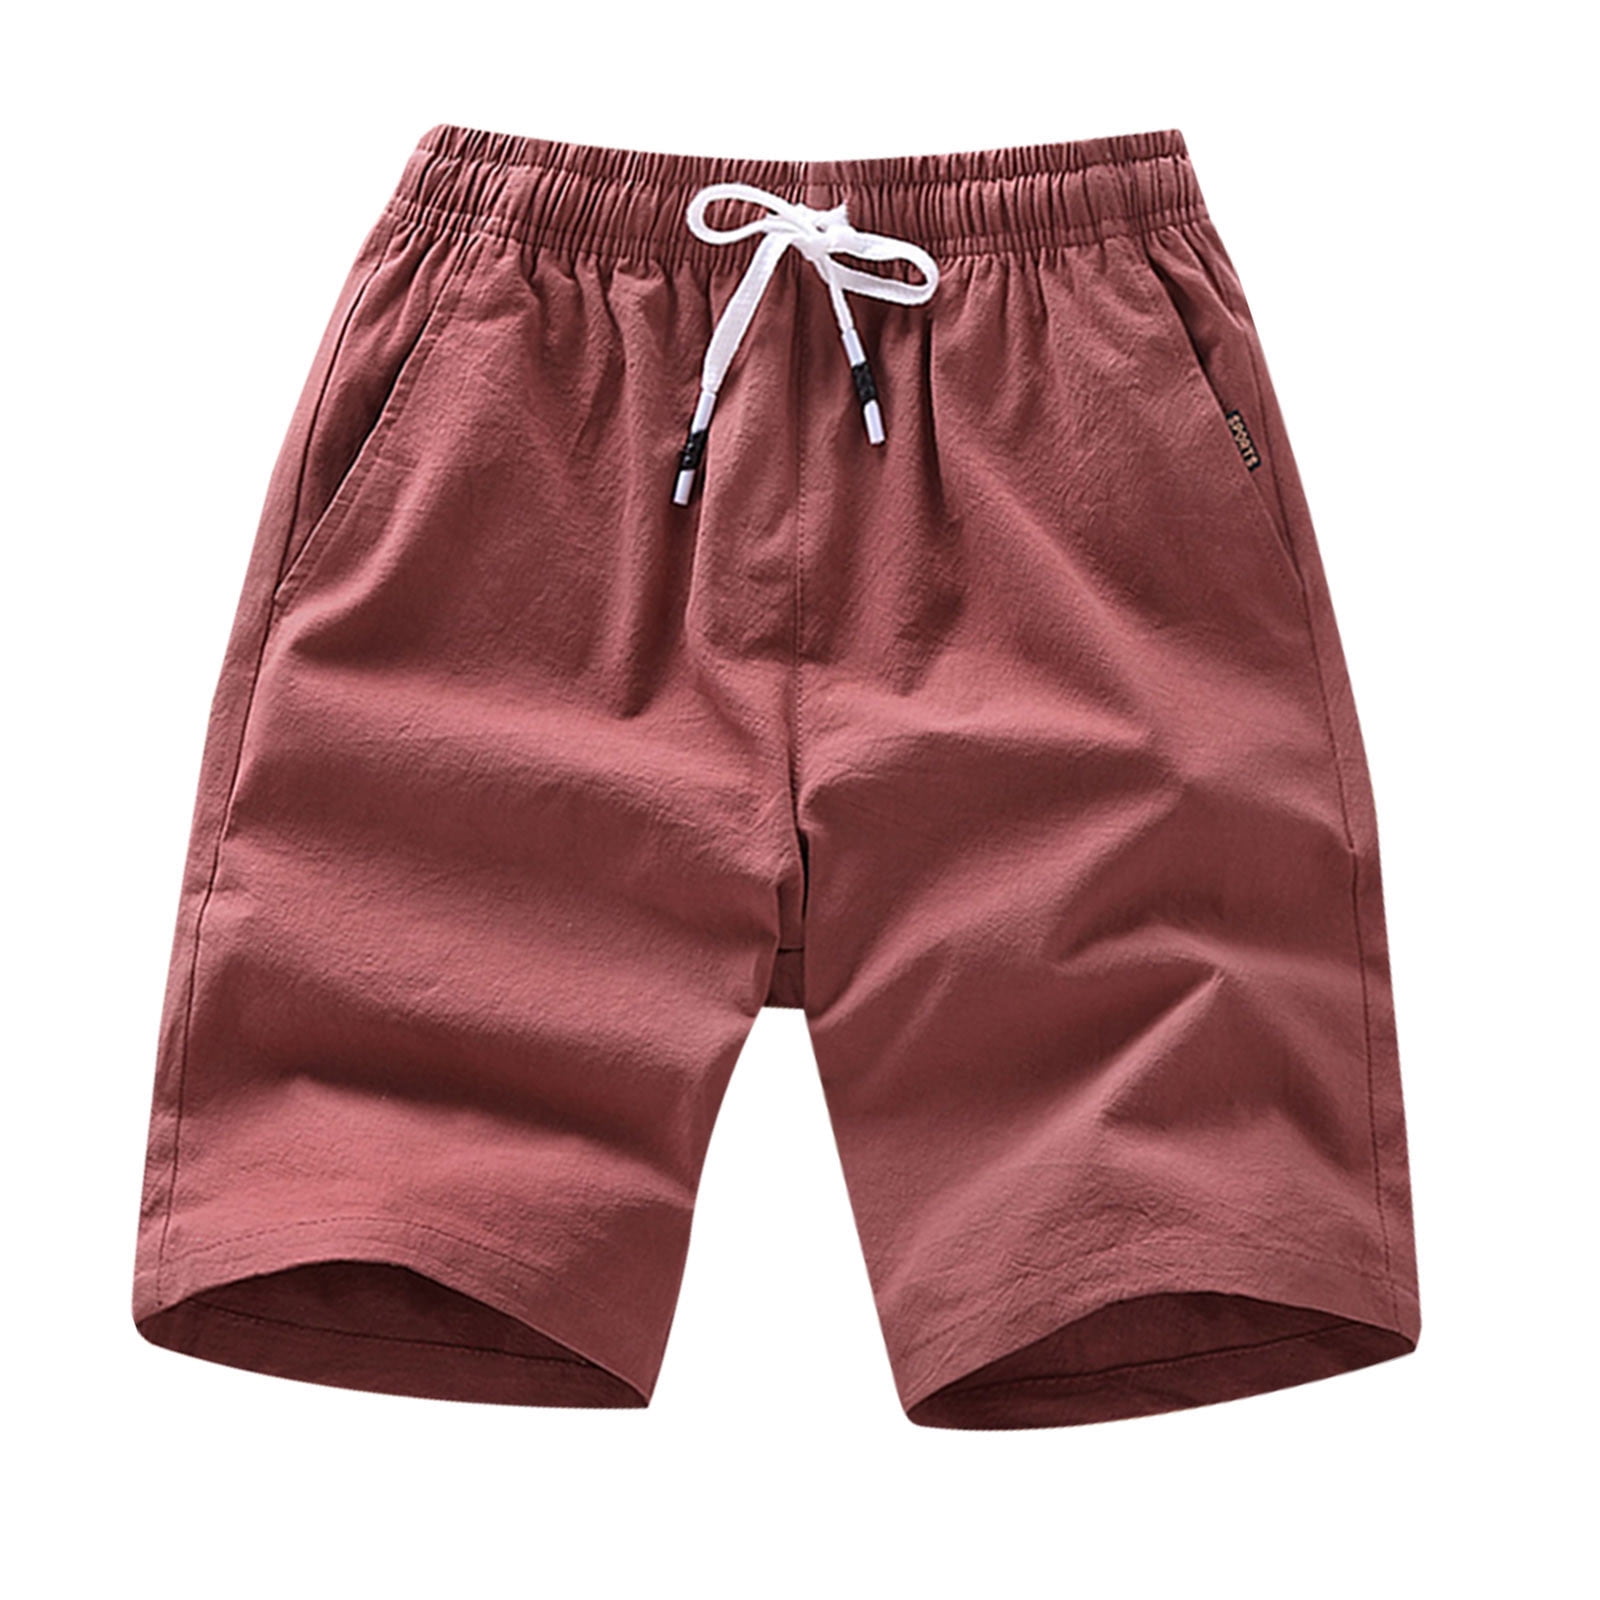 Men'S Short Pants Made Of Pure Cotton Fabric Are Thin And Breathable ...